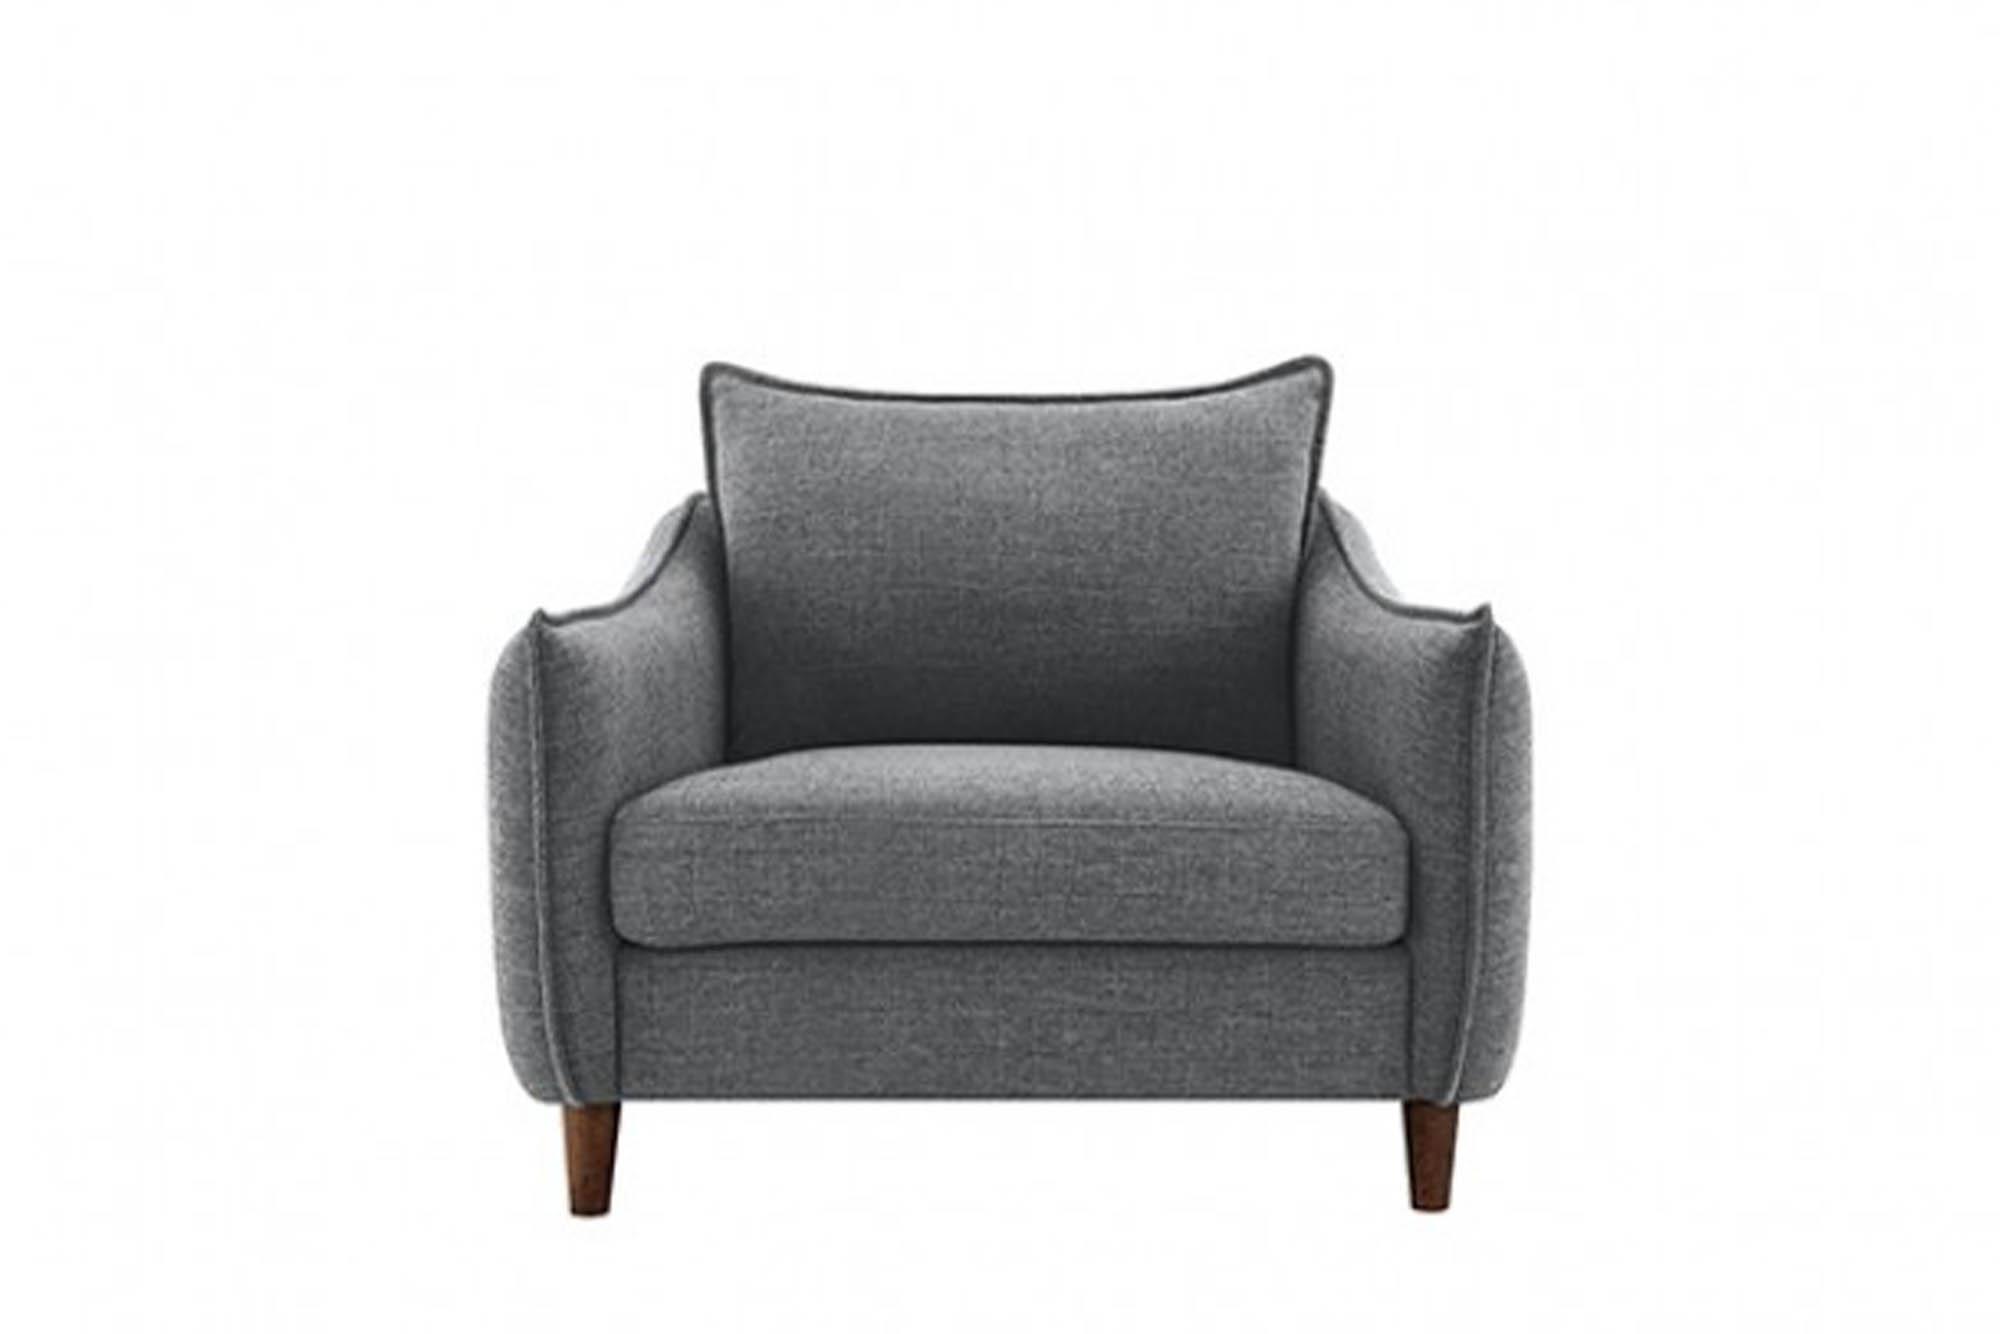 Contemporary Arm Chair FM61004GY-CH FM61004GY-CH in Gray Chenille